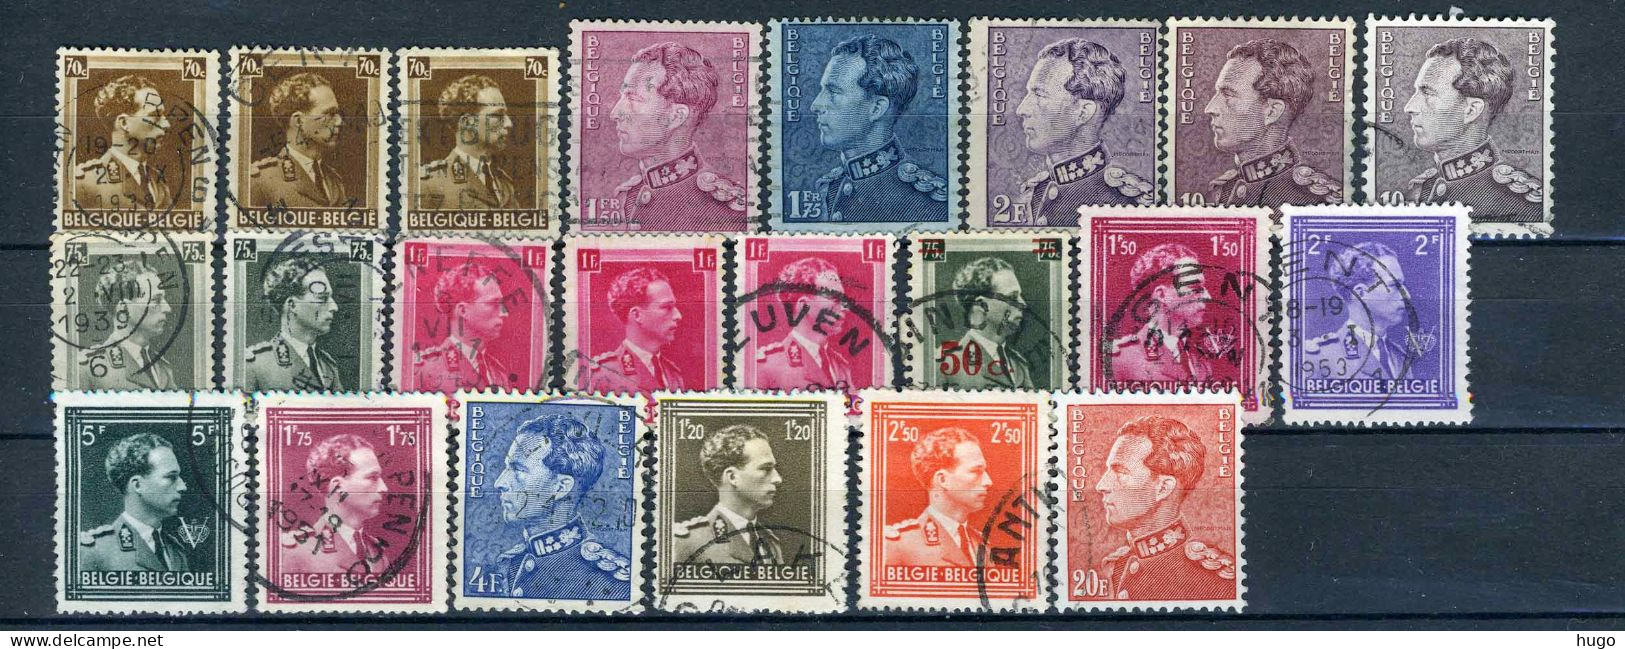 (B) Lot Zegels Leopold 3 Gestempeld  (1936 - 1951) -11 - Used Stamps